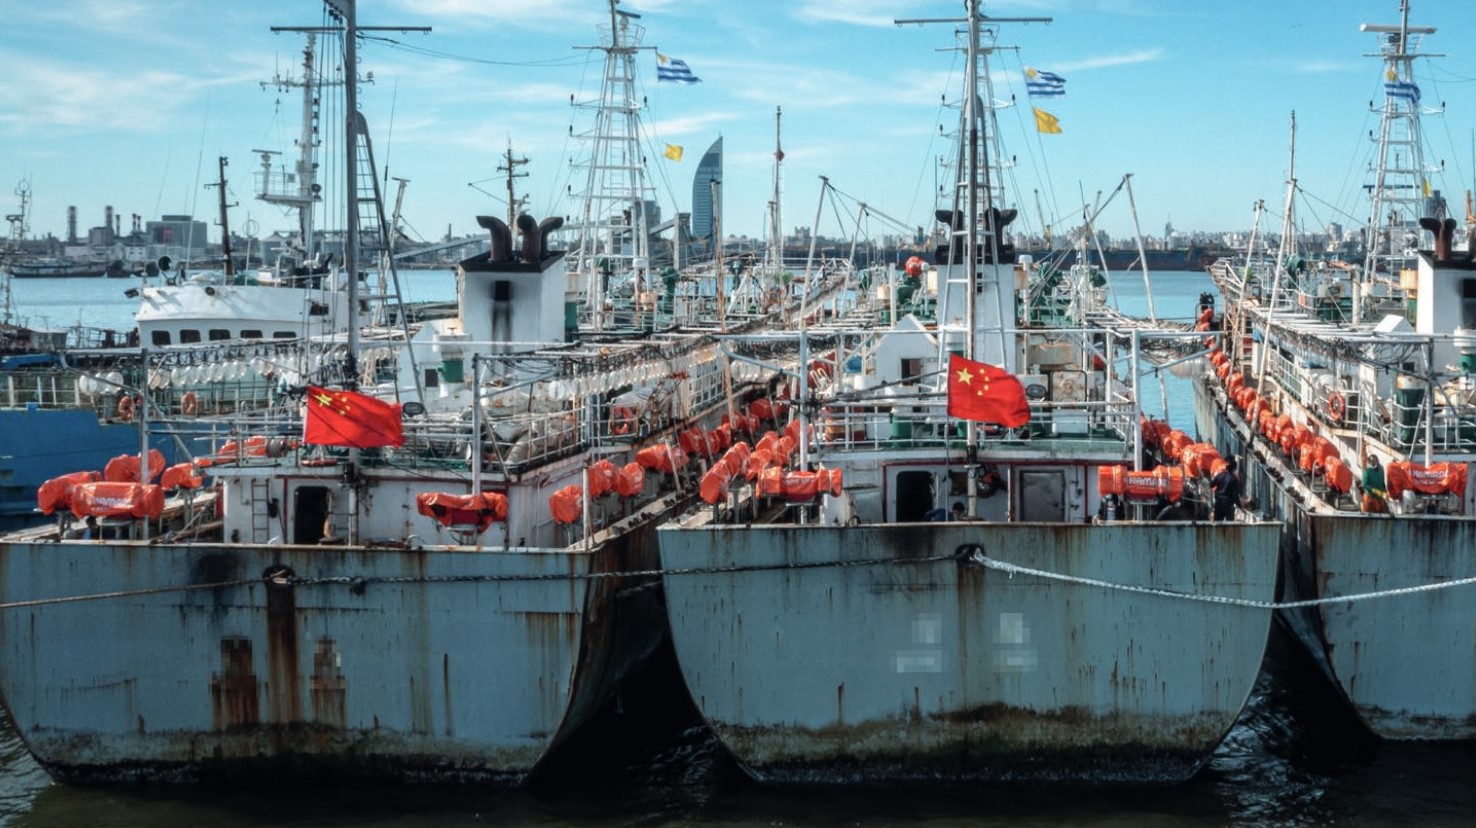 The EU Long Distance Fisheries and the Market Advisory Councils adopt a Joint Advice on the Activity and Impact of the Chinese Distant Water Fleet